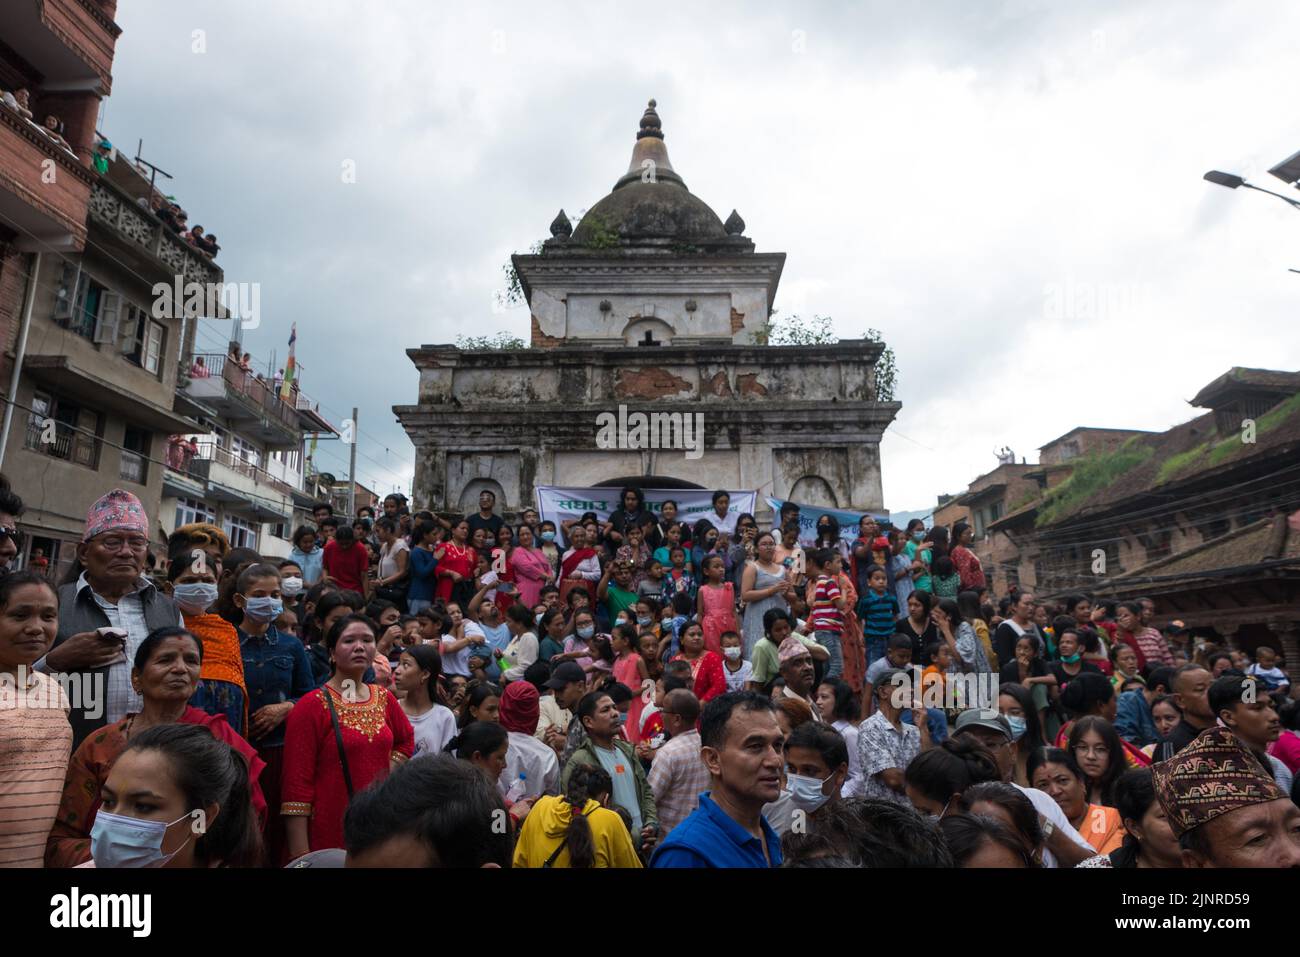 People gathered around the temple to watch the Gai Jatra dance and procession during the festival. People celebrate Gai Jatra or cow festival in memory of the departed souls in the past year for salvation and peace. It is believed that cows guide the departed souls to cross the river to get to heaven. Stock Photo